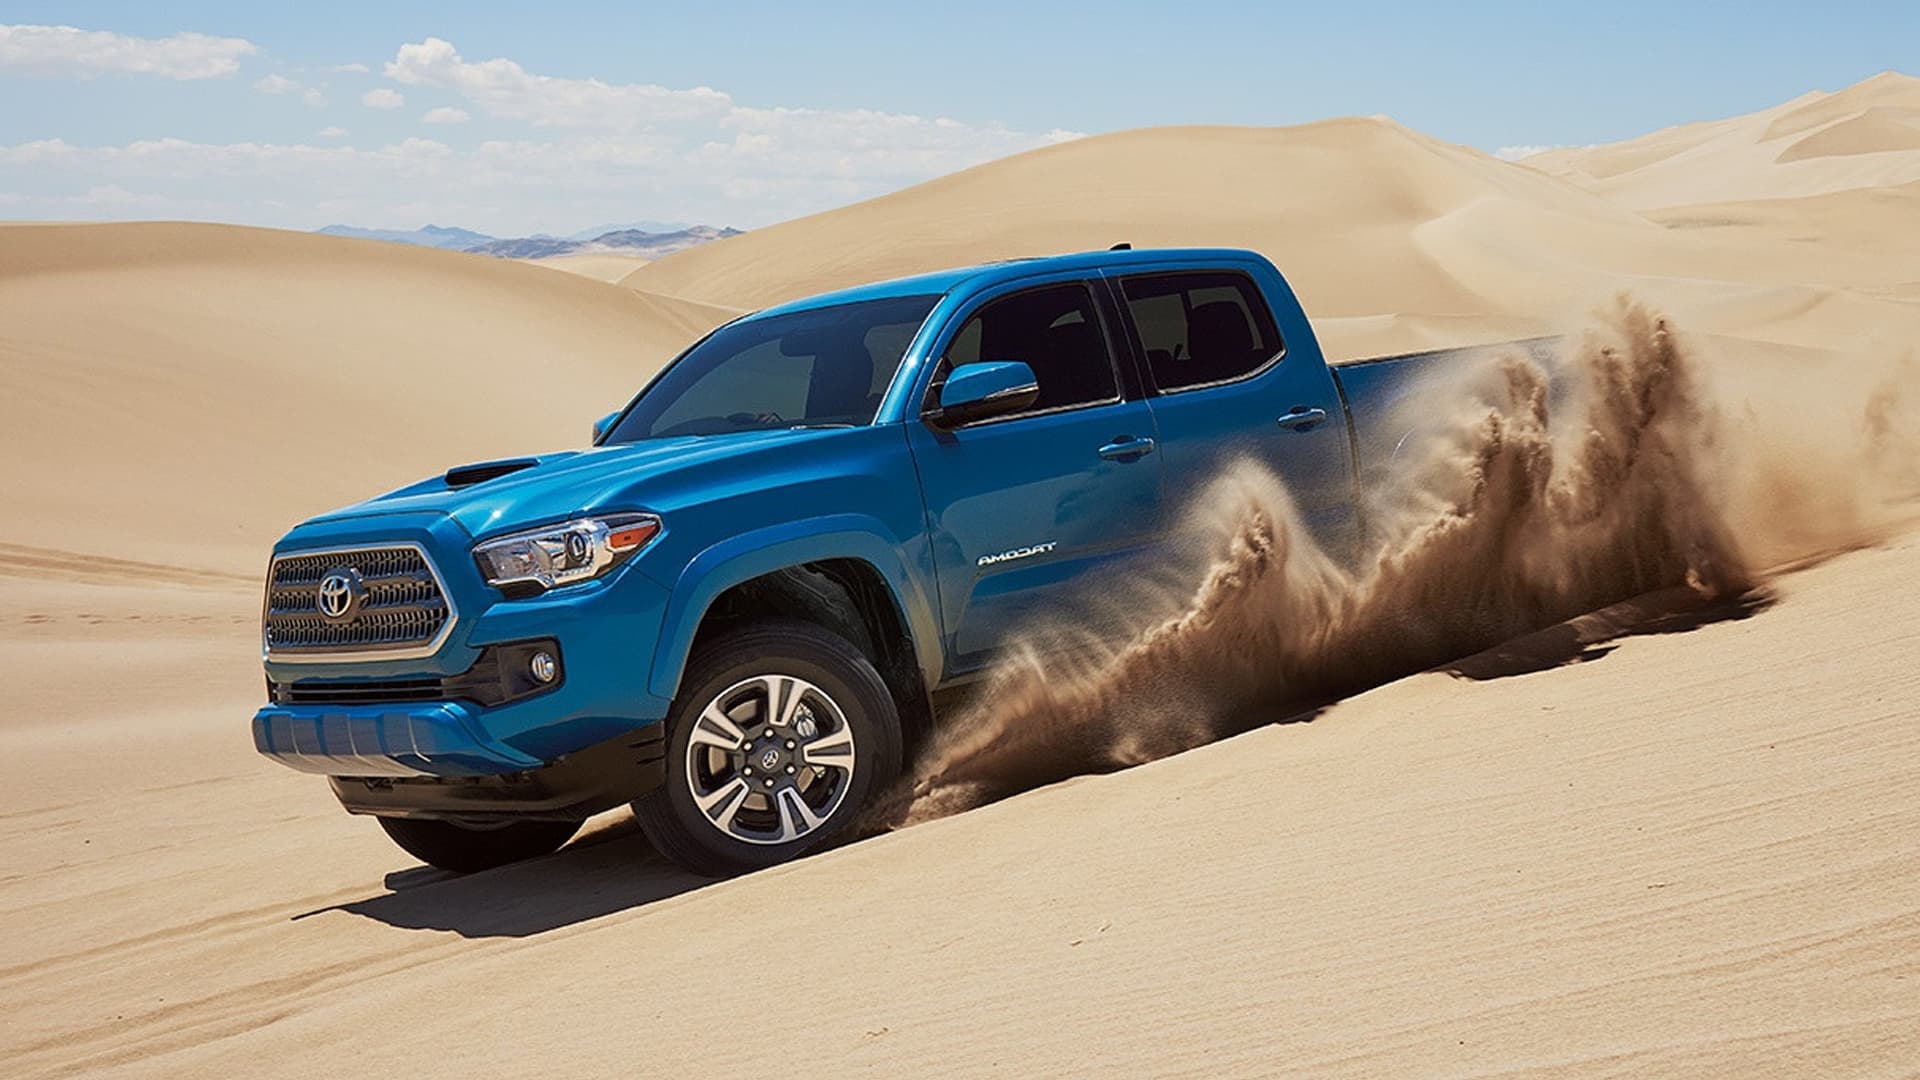  Toyota Tacoma wallpapers HD High Resolution Download